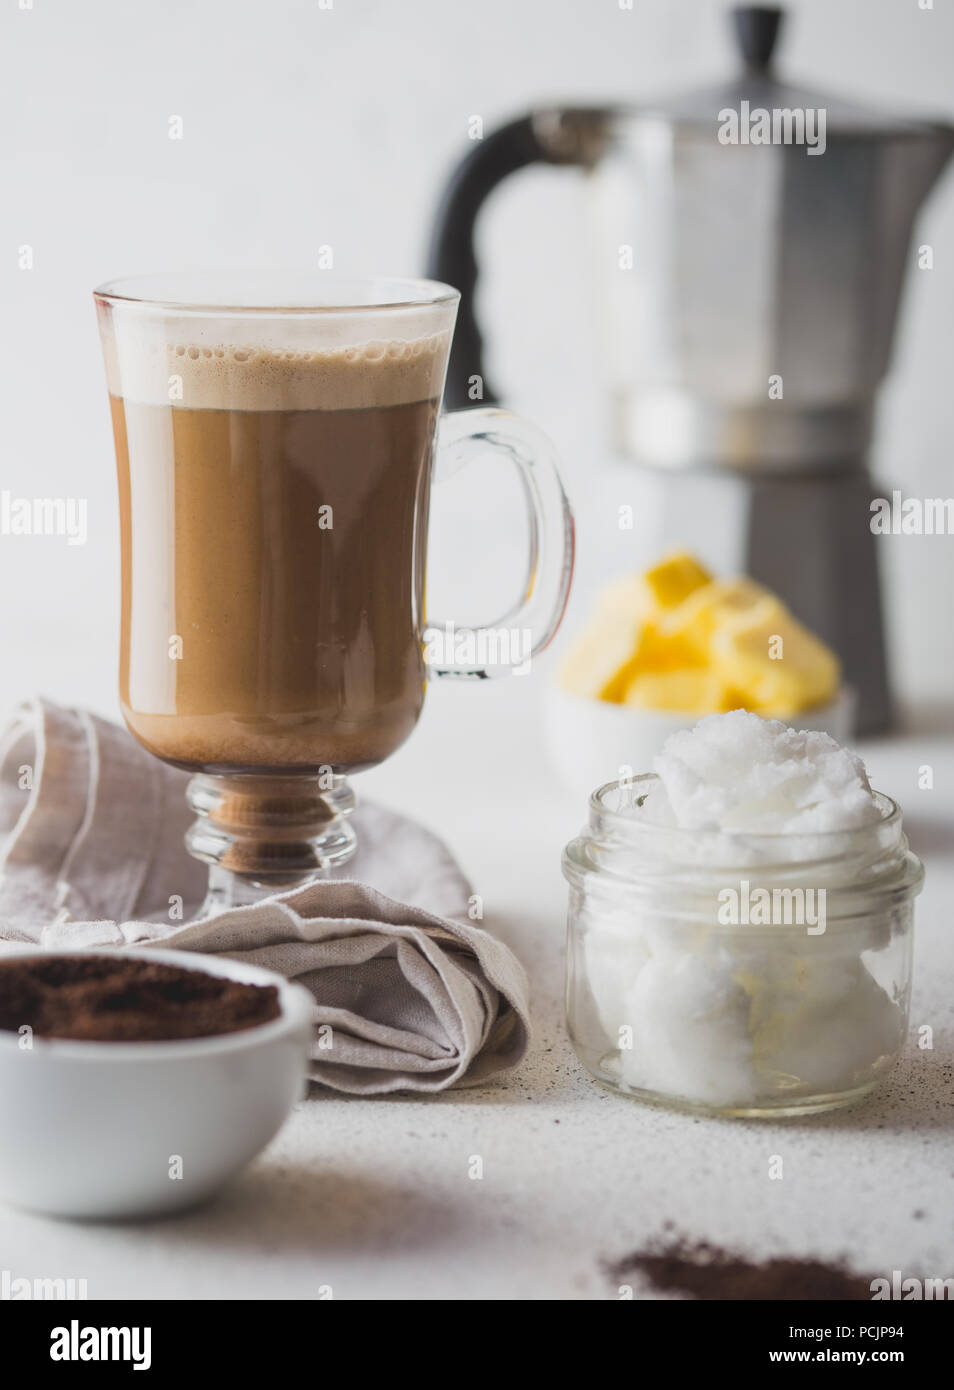 https://c8.alamy.com/comp/PCJP94/bulletproof-coffee-ketogenic-keto-diet-coffe-blended-with-coconut-oil-and-butter-cup-of-bulletproof-coffee-and-ingredients-on-white-background-PCJP94.jpg